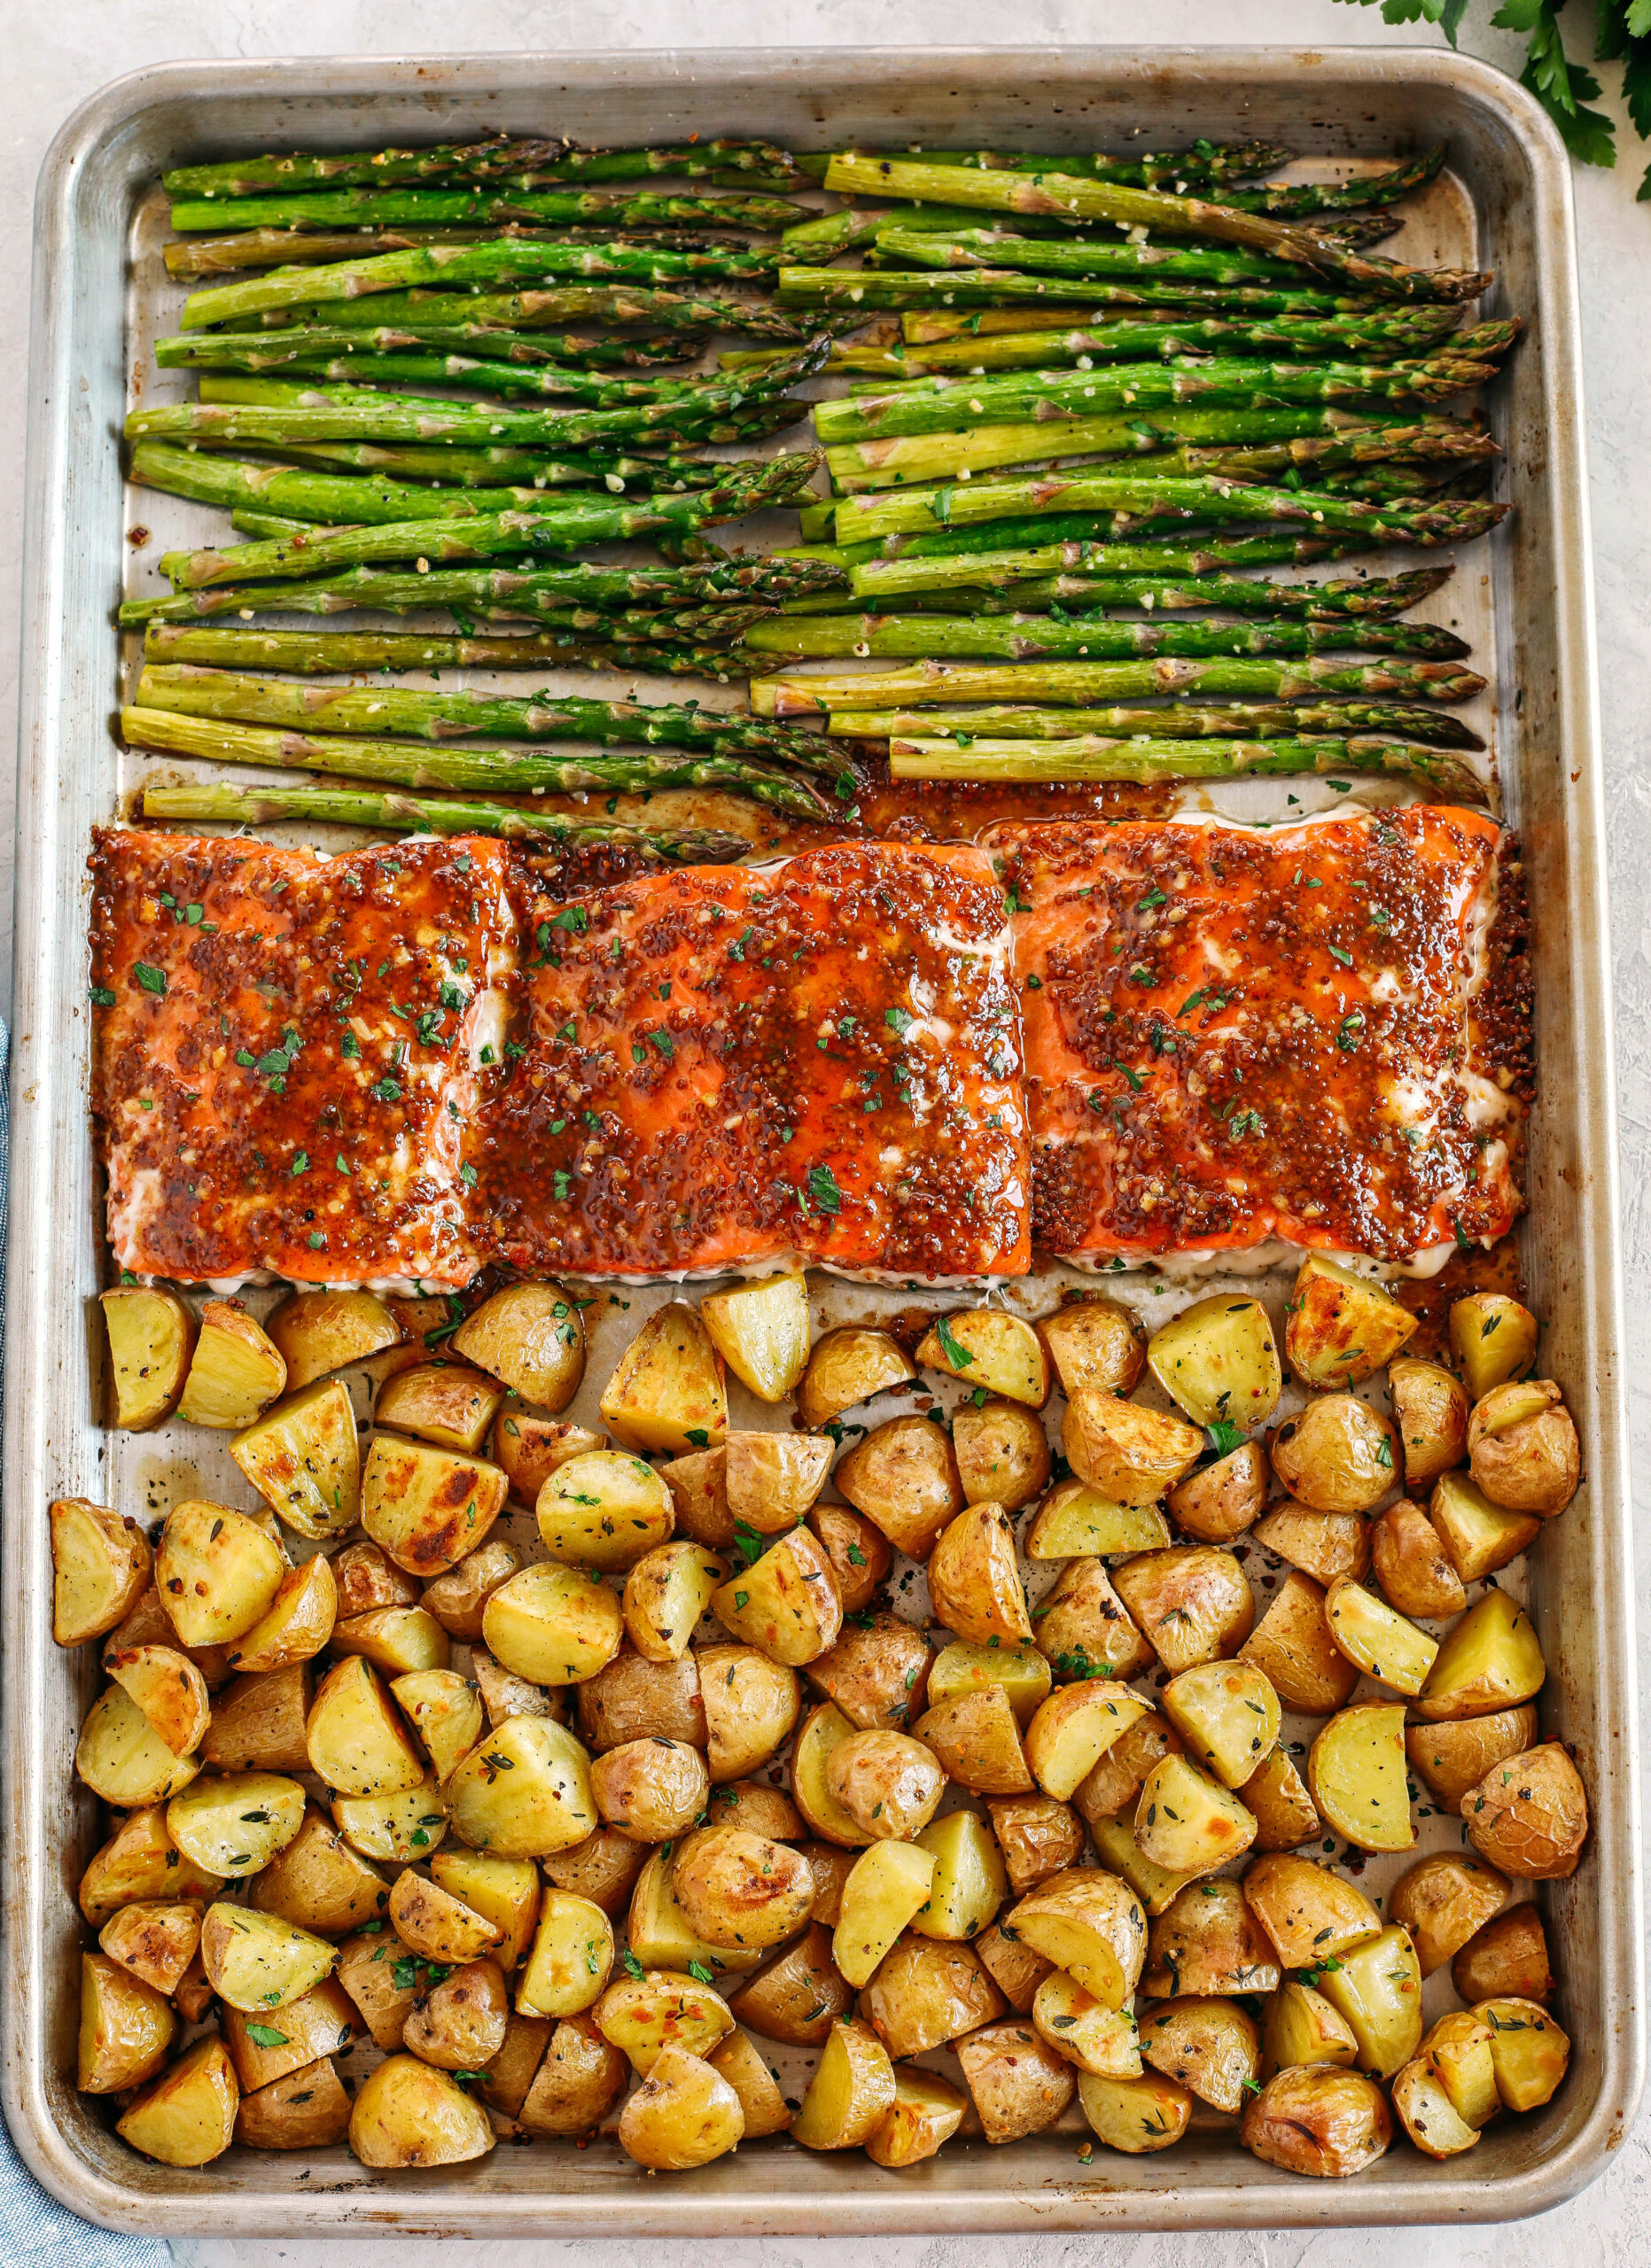 Sheet Pan Maple Dijon Glazed Salmon with roasted asparagus and tender seasoned potatoes make the perfect weeknight dinner that is easily made all in one pan in just 30 minutes!